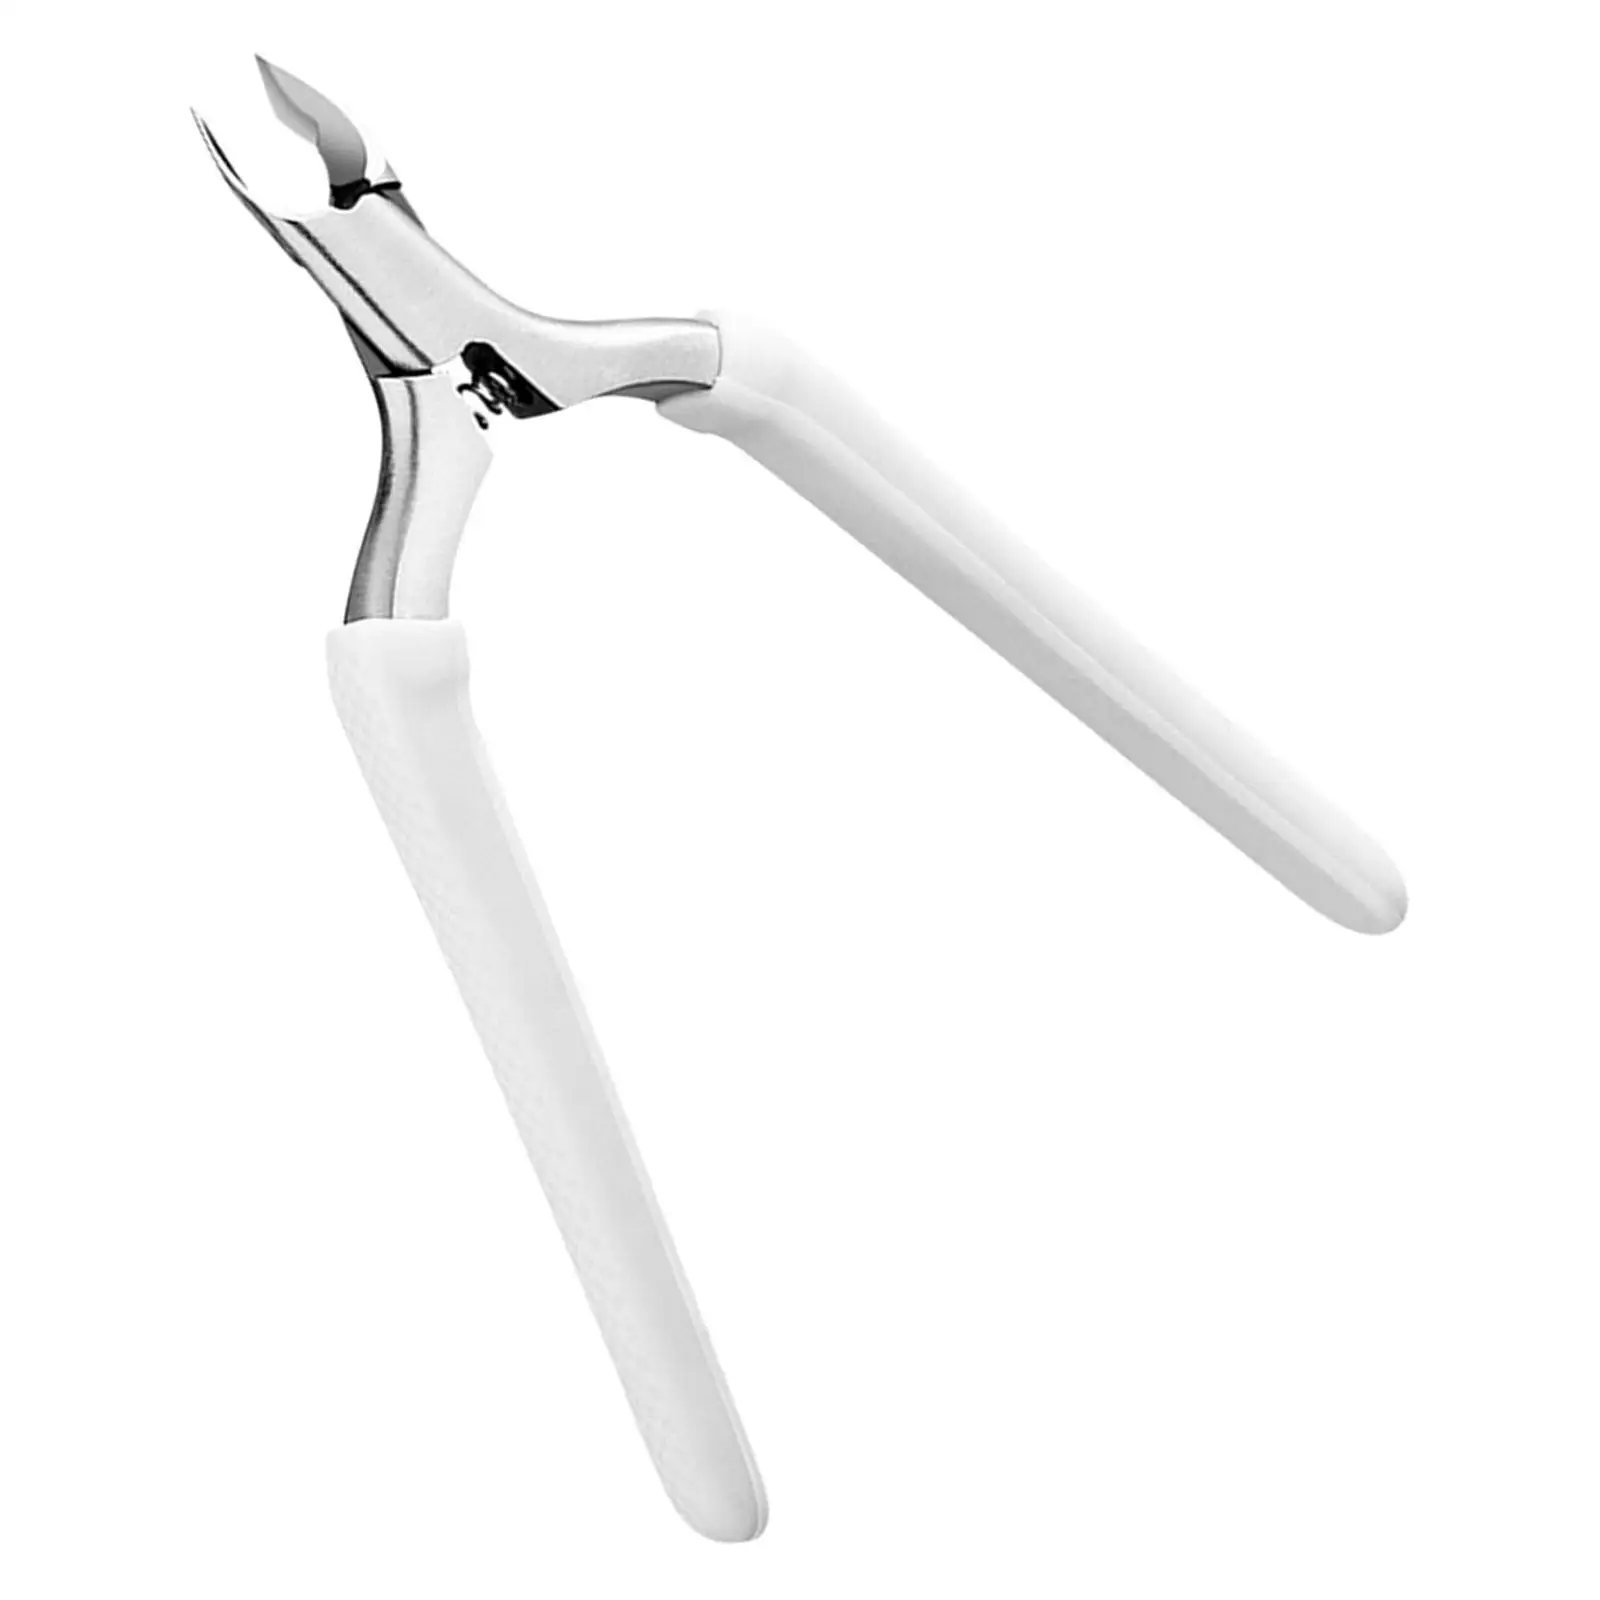 Cuticle Clipper Dry Skin Remover, Manicure Pedicure Tool, Stainless Steel Nail Care Tool Cuticle Nippers, for Home SPA Salon